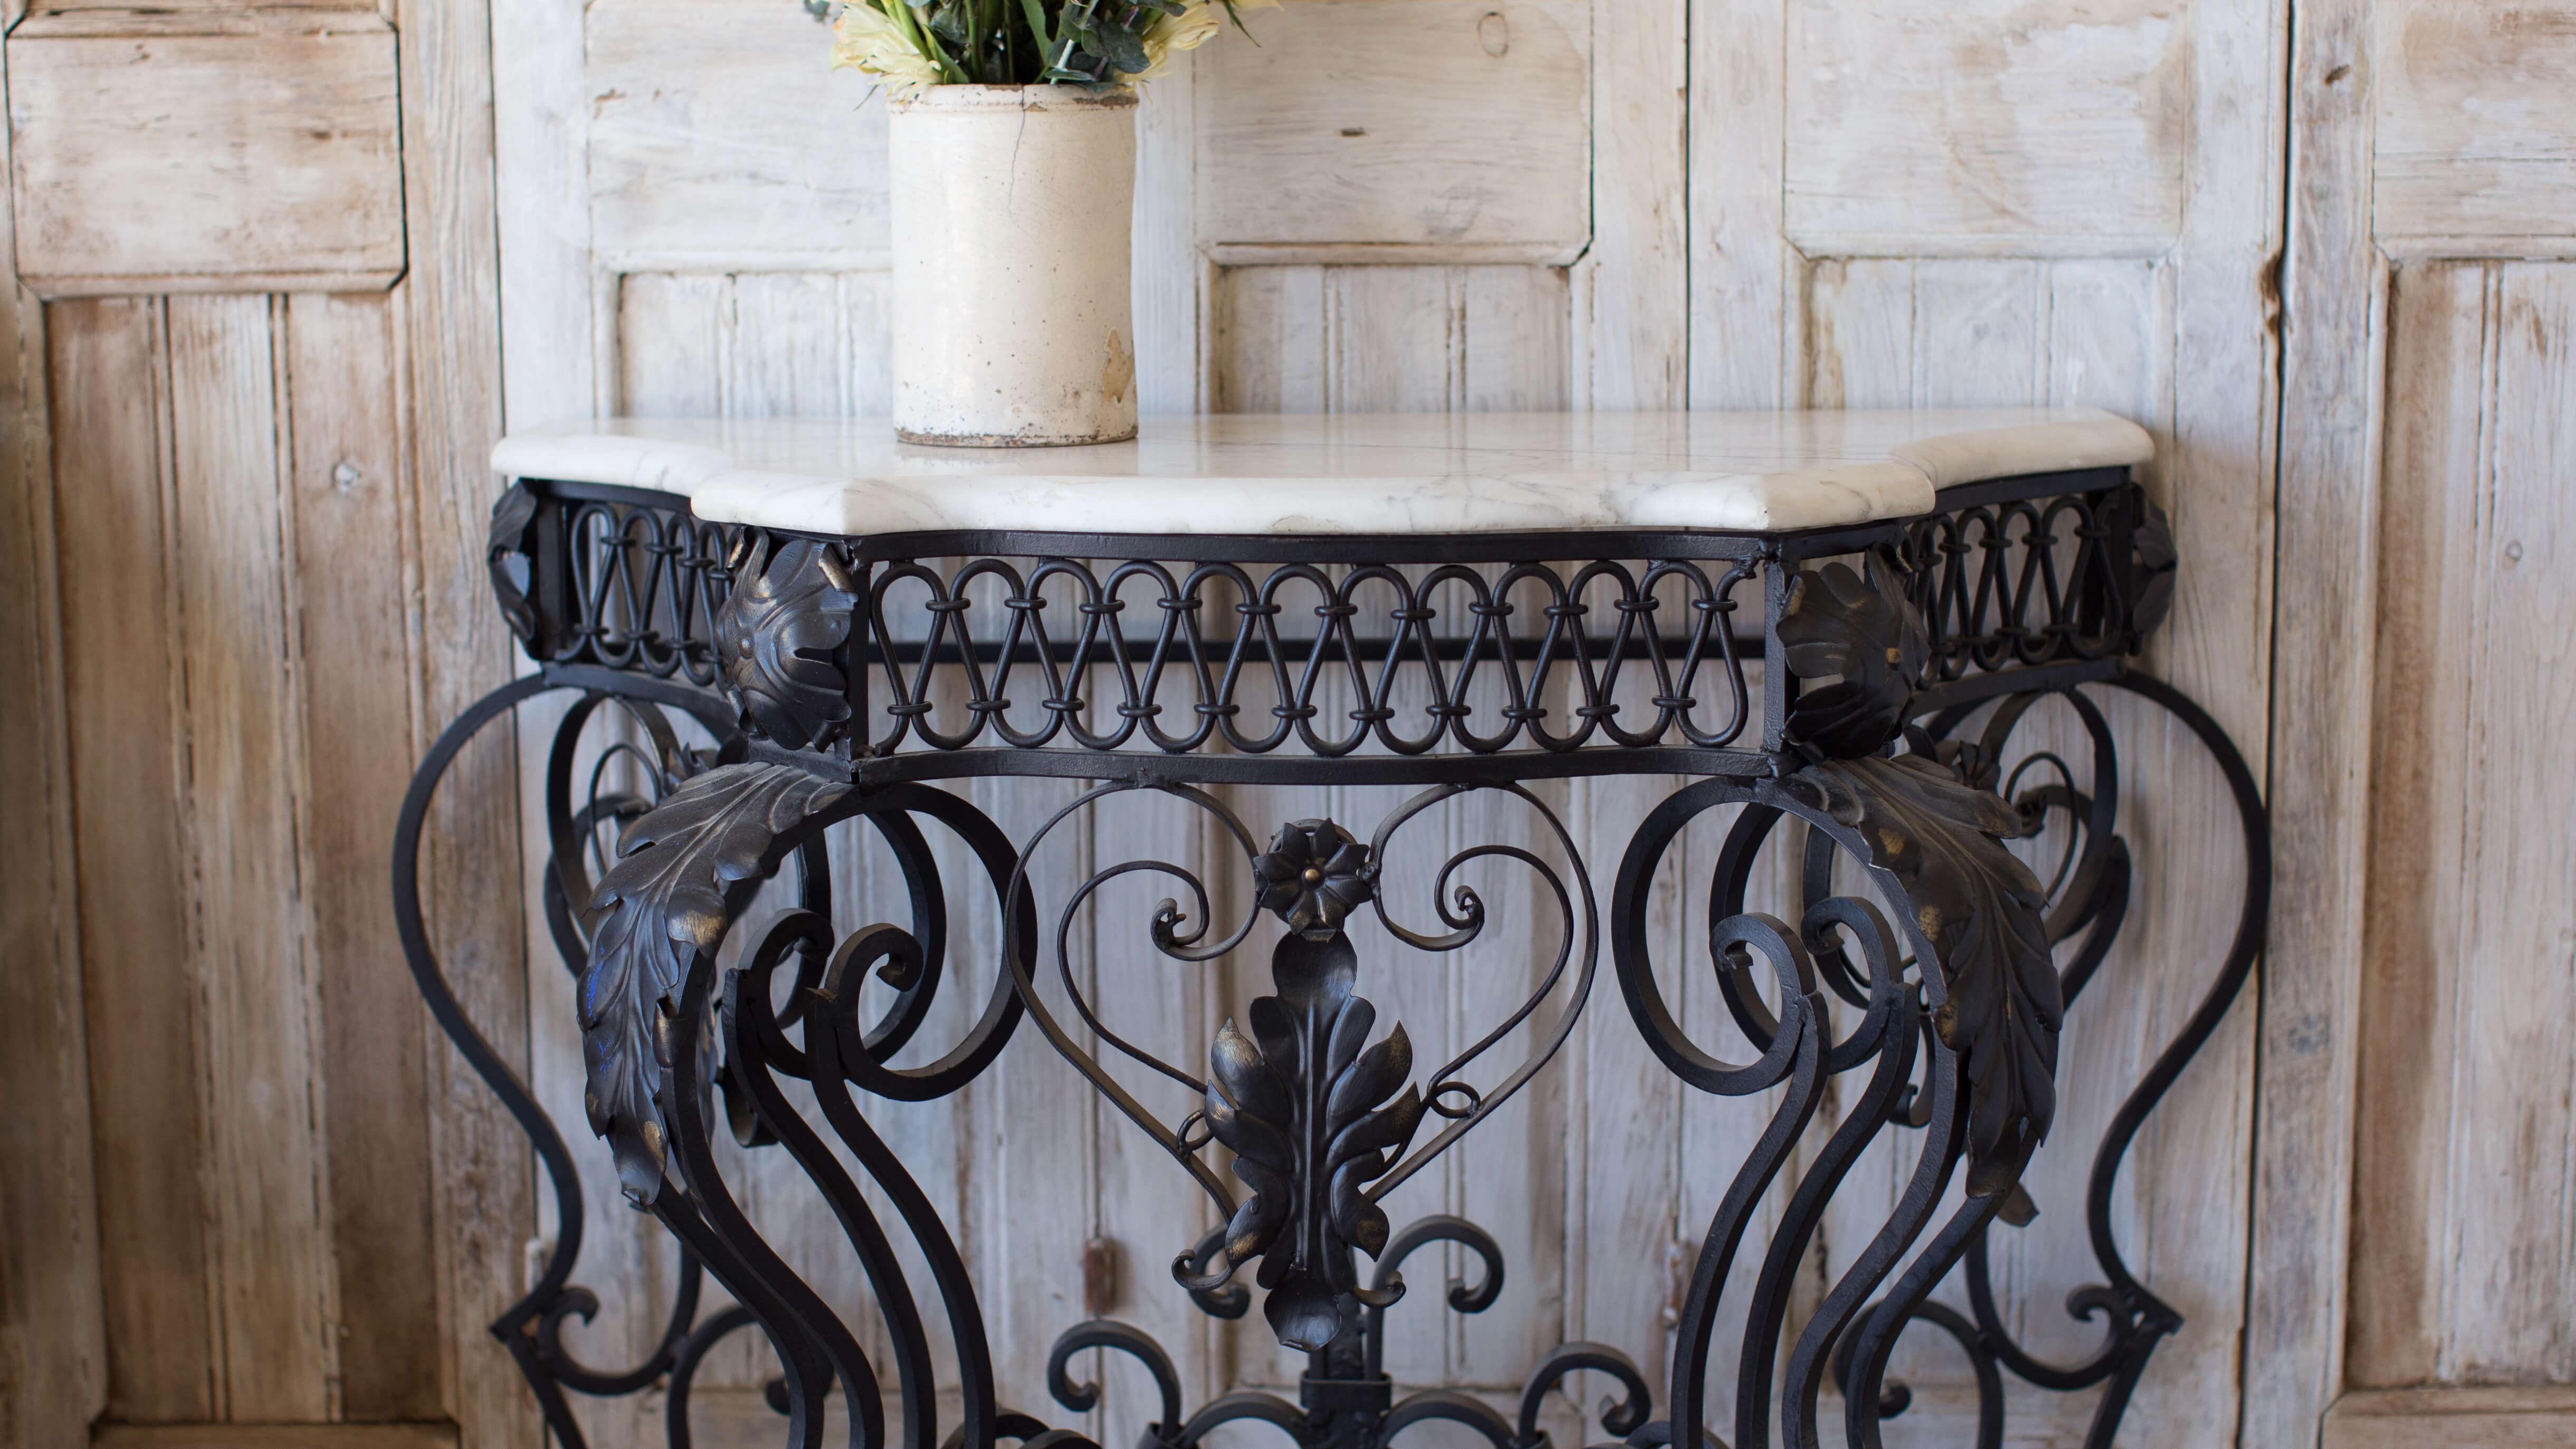 Romantic French antique wall console with white marble top and soft edge. Beautiful hand-forged scrolling details in wrought iron and painted black with the slightest hints of gold.